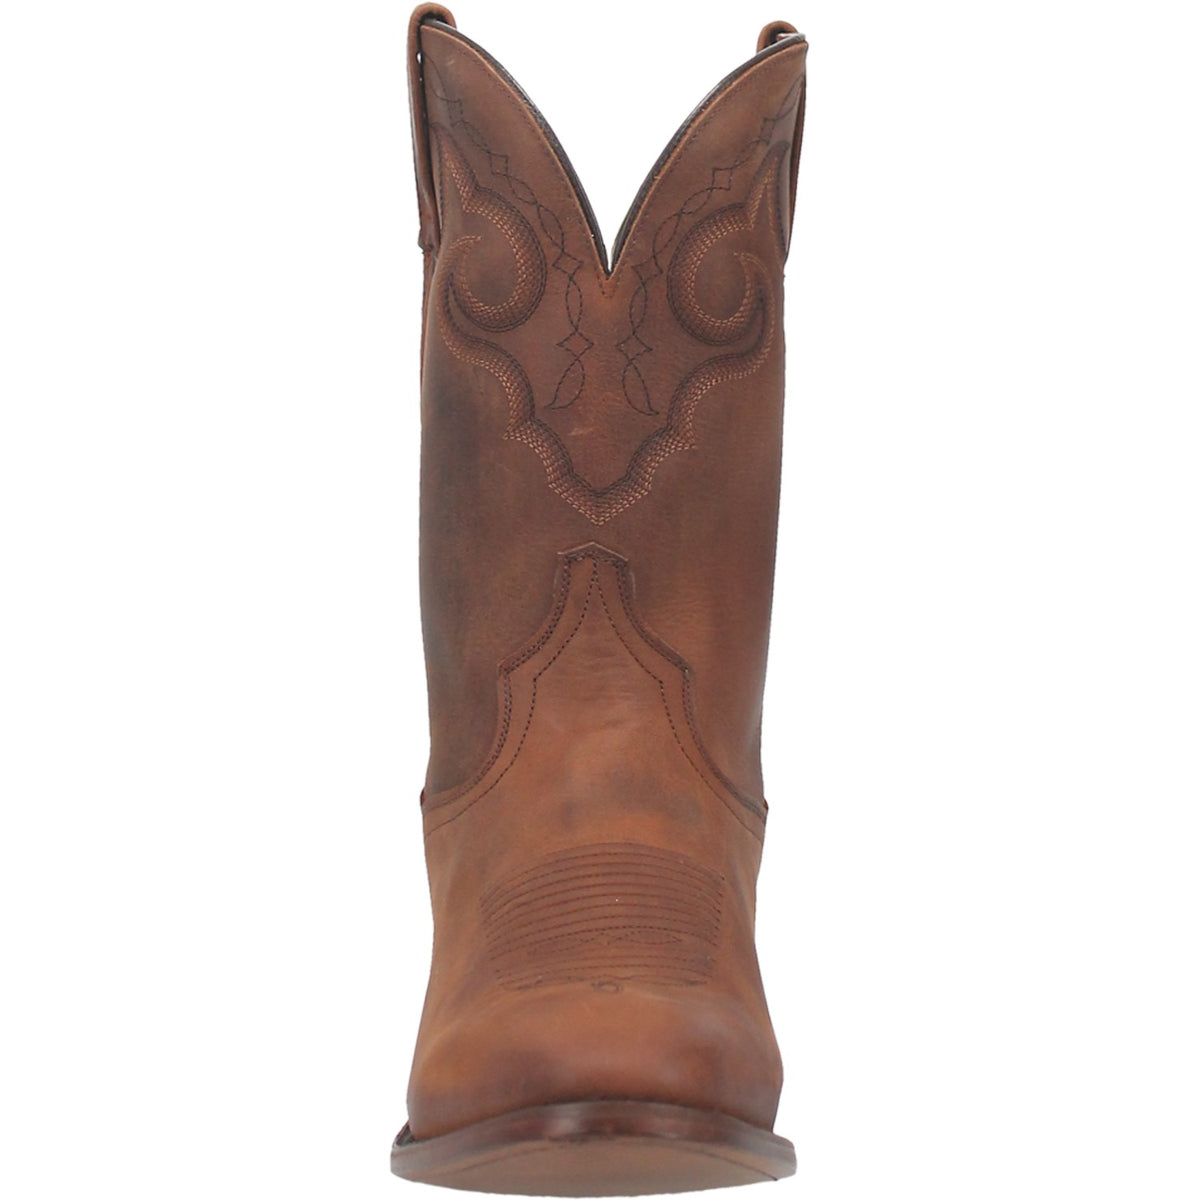 SIMON LEATHER BOOT Cover